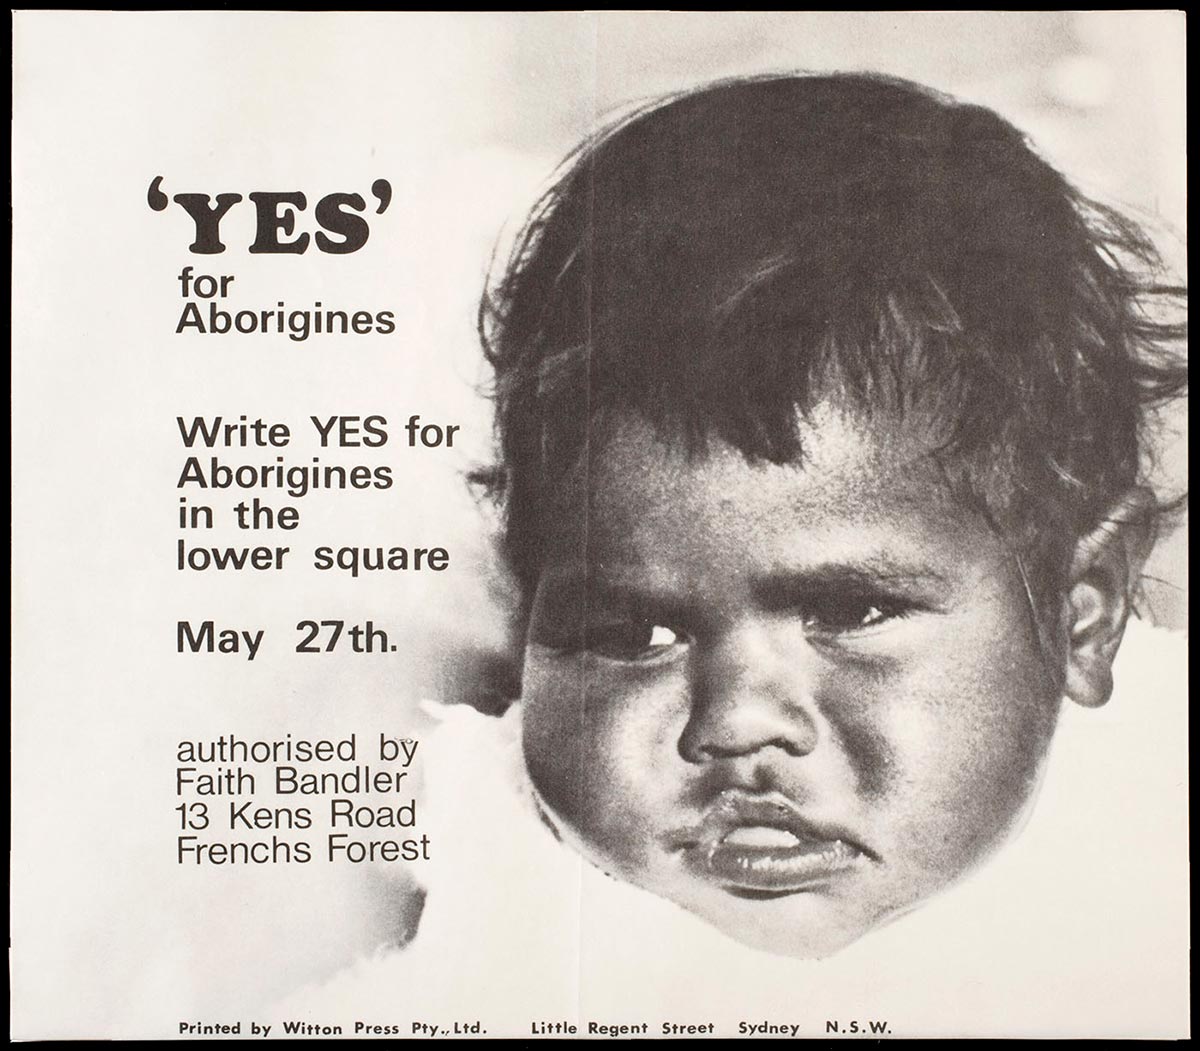 Poster with the words, 'Yes for Aborigines, Write YES for Aborigines in the lower square, May 27th, authorised by Faith Bandler 13 Kens Road, Frenchs Forest', with a photo of an Aboriginal baby's face. - click to view larger image